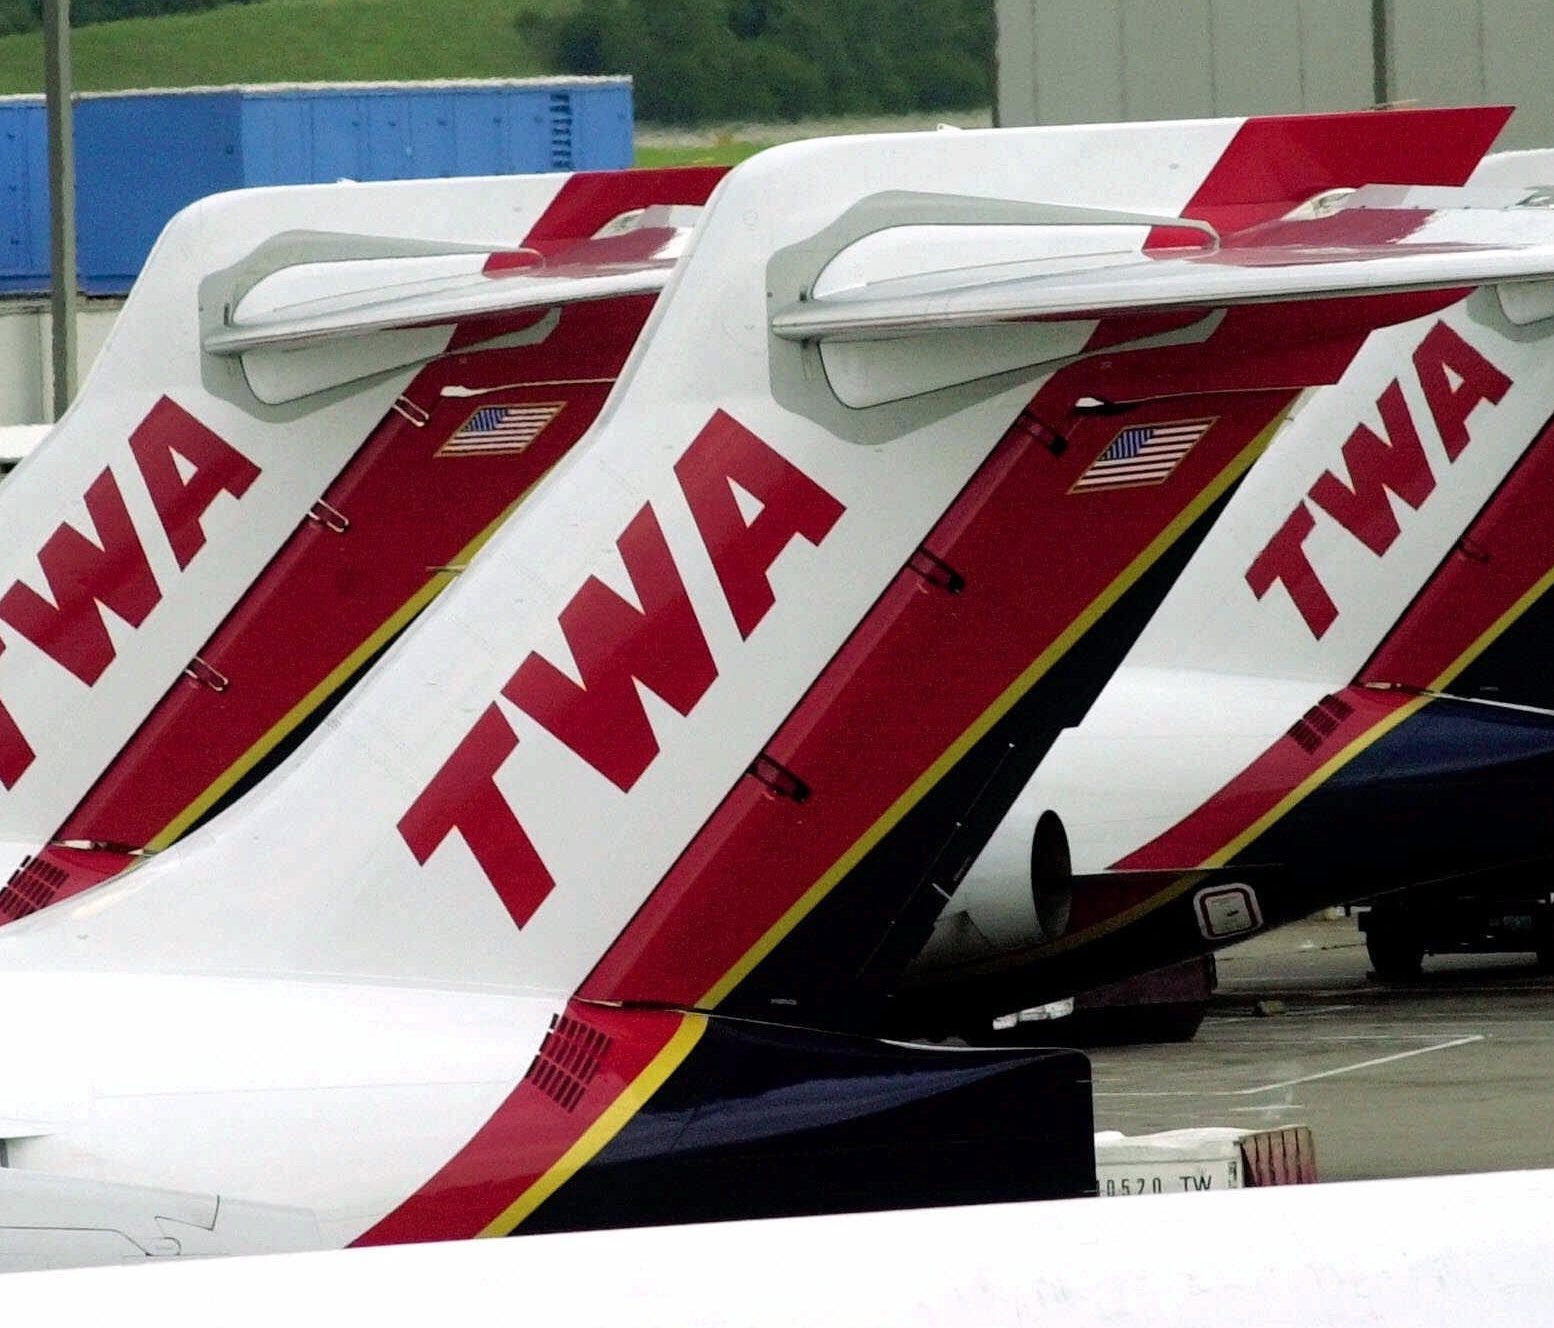 This file photo from June 2000 shows TWA aircraft at Lambert International Airport in St. Louis.